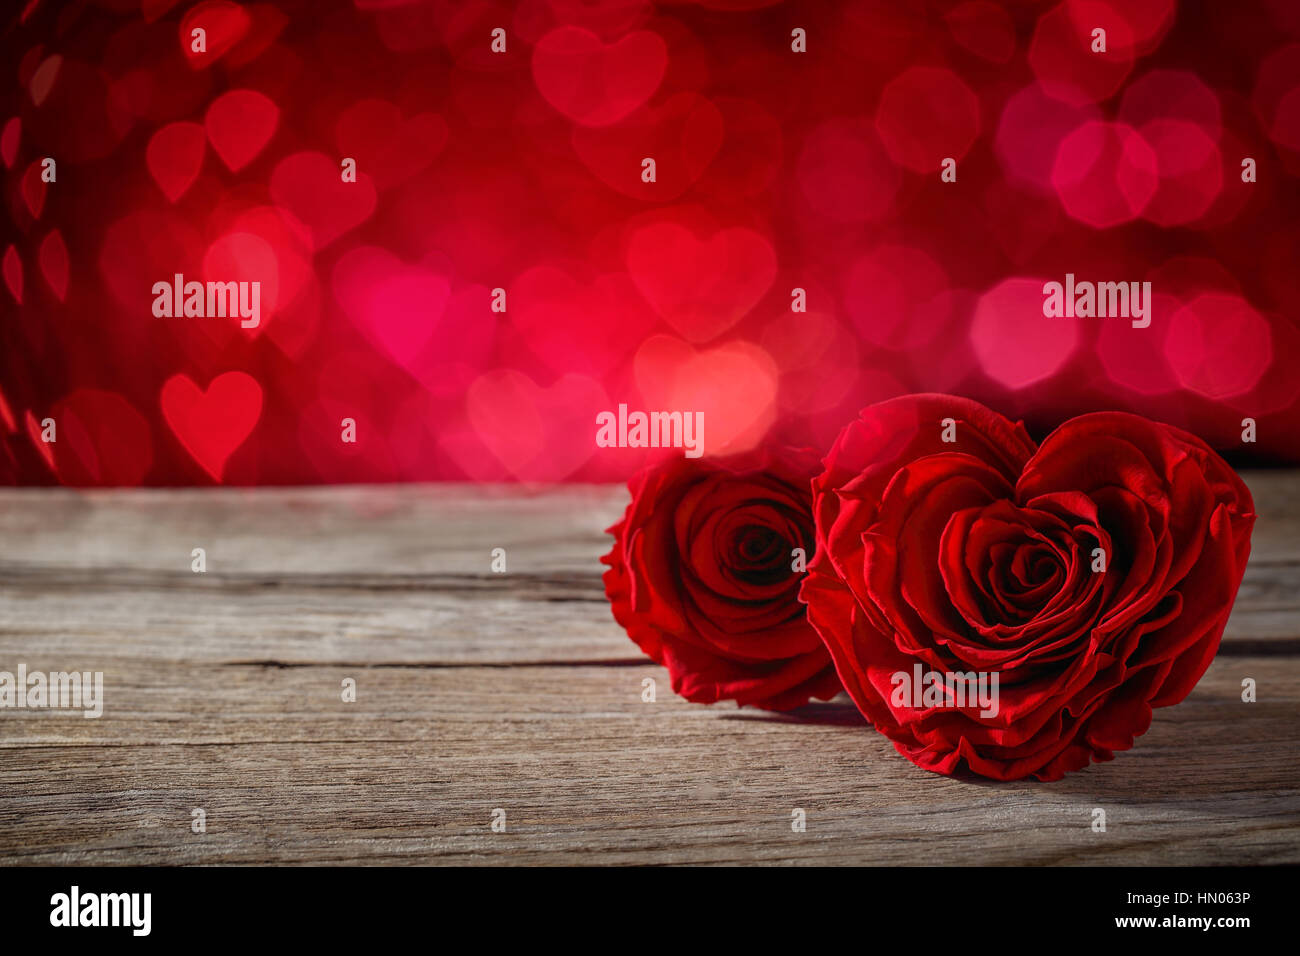 Heart shape of rose on wooden table,Valentines background Stock Photo